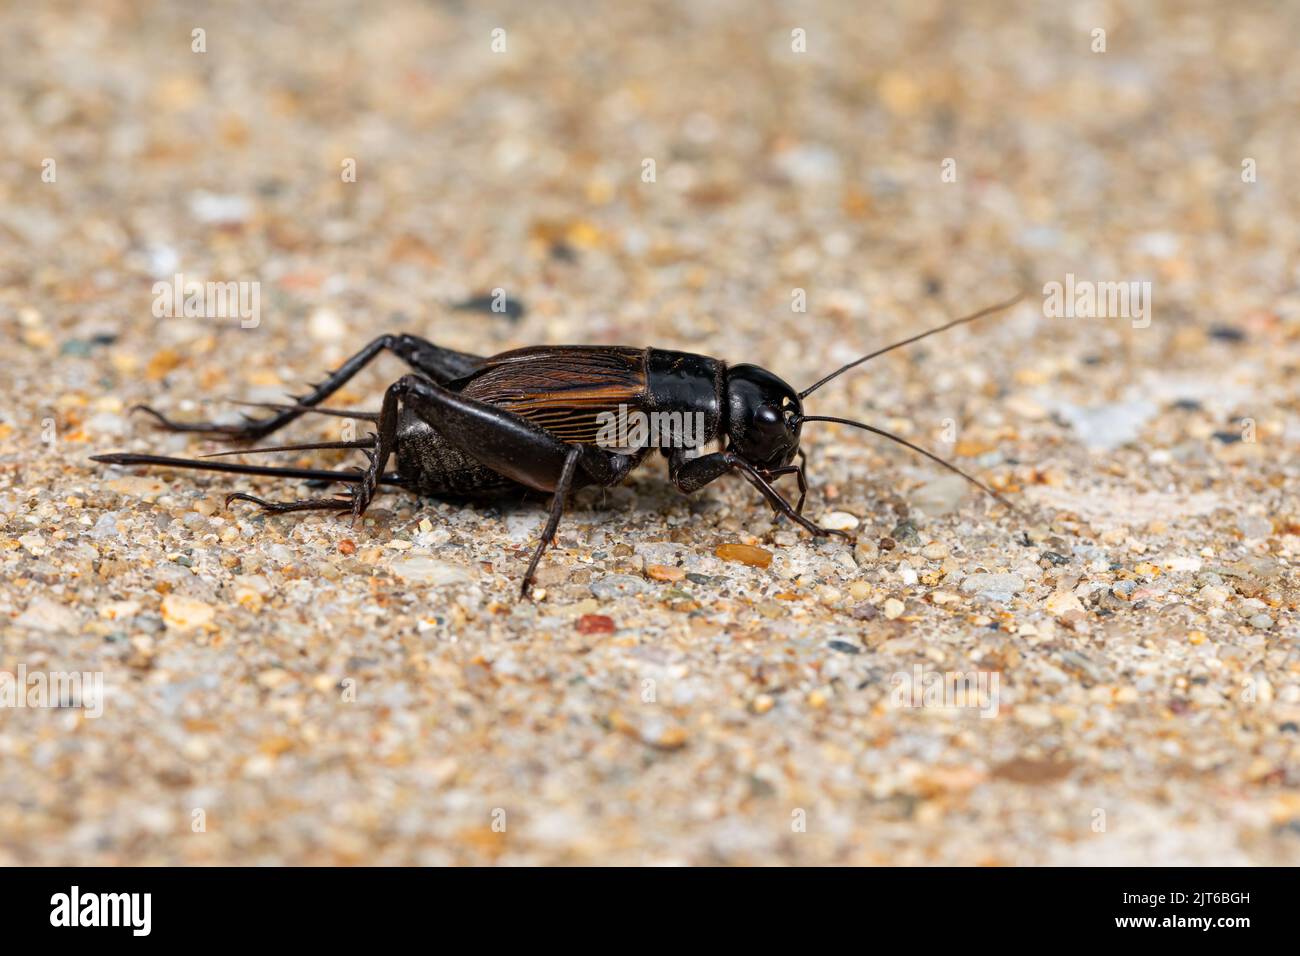 Closeup of Field Cricket. Pest control, insect and nature conservation concept. Stock Photo